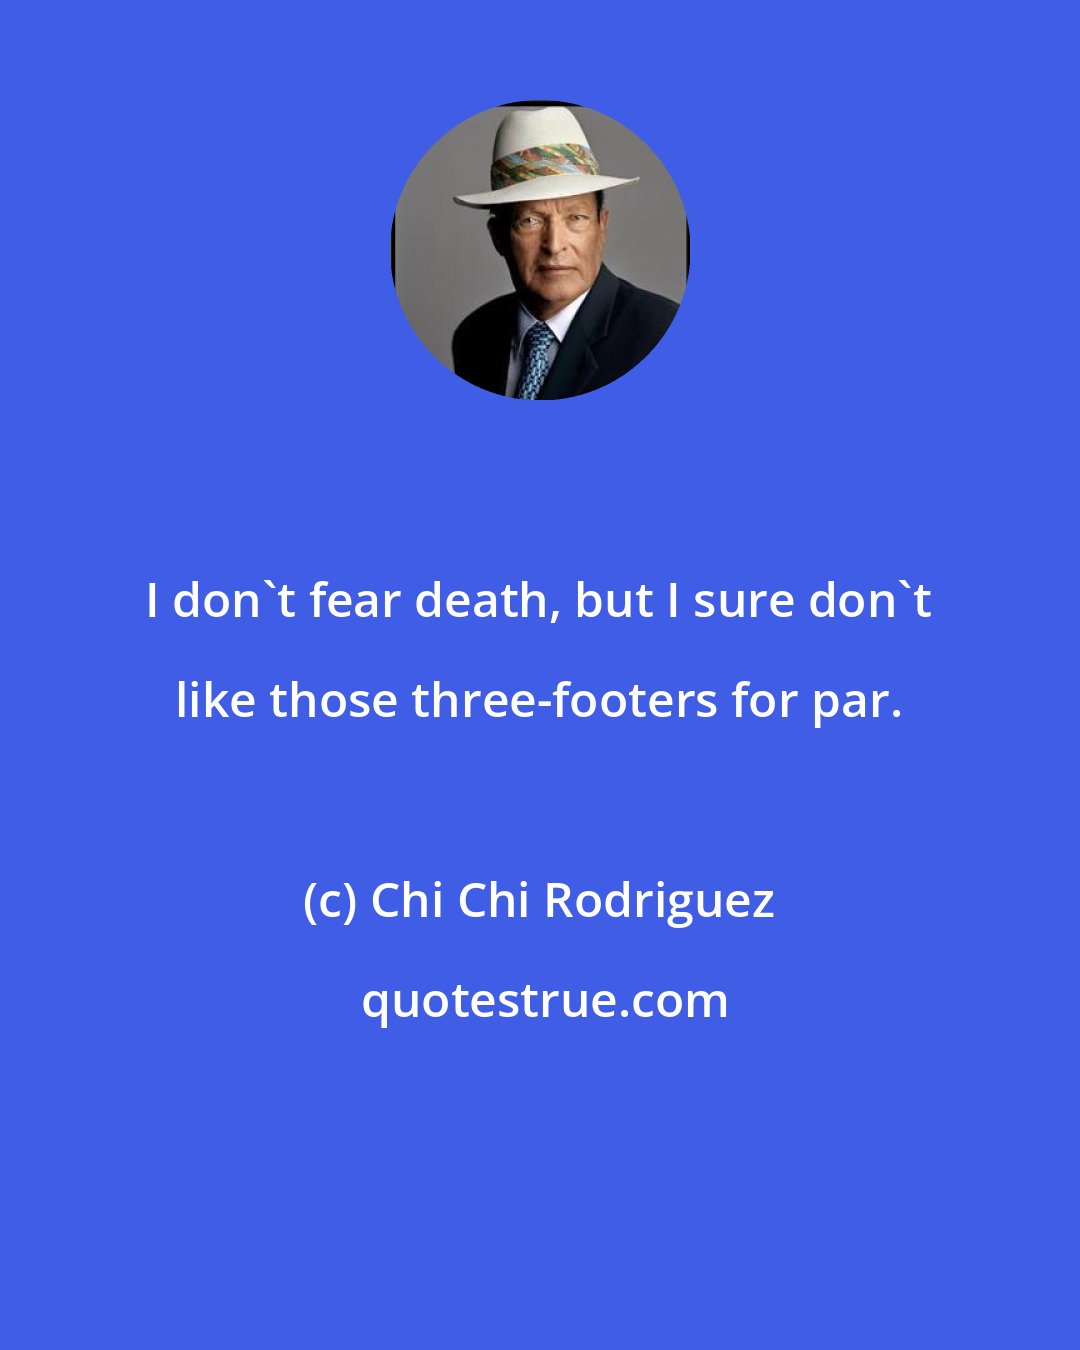 Chi Chi Rodriguez: I don't fear death, but I sure don't like those three-footers for par.